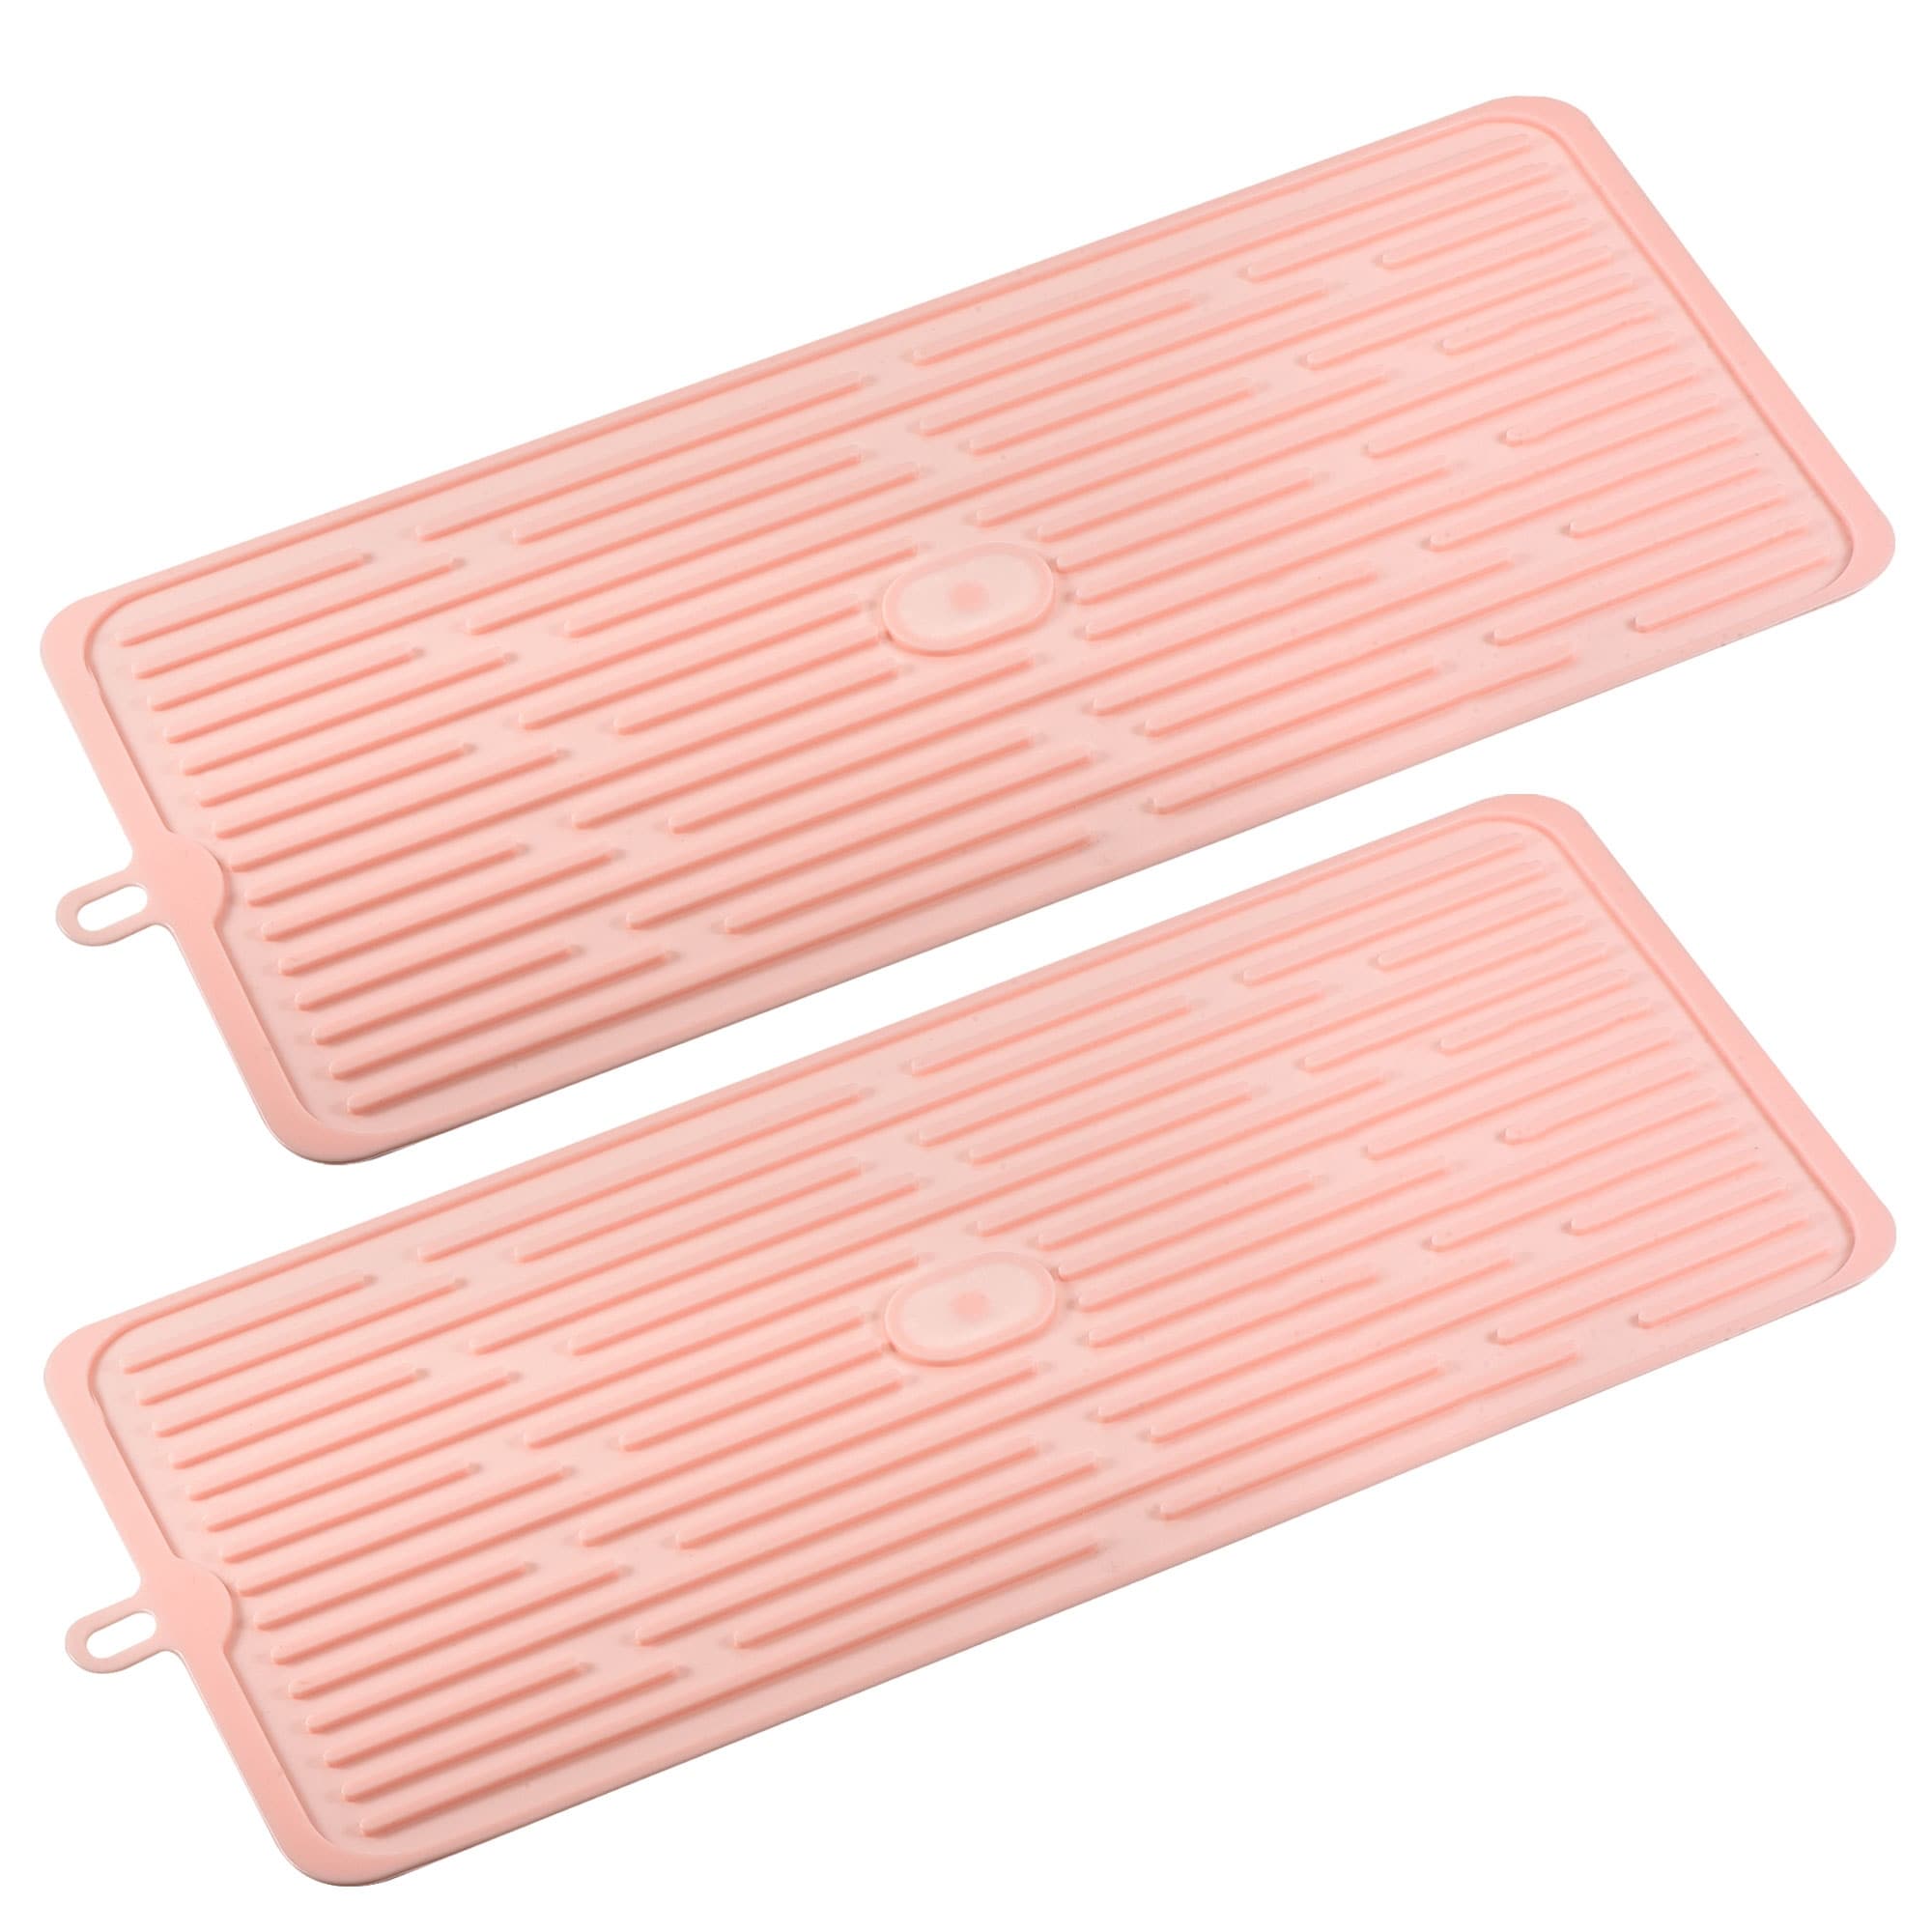 Norpro Washable Microfiber Dish Drainer Glass Drying Mat Pad - Bed